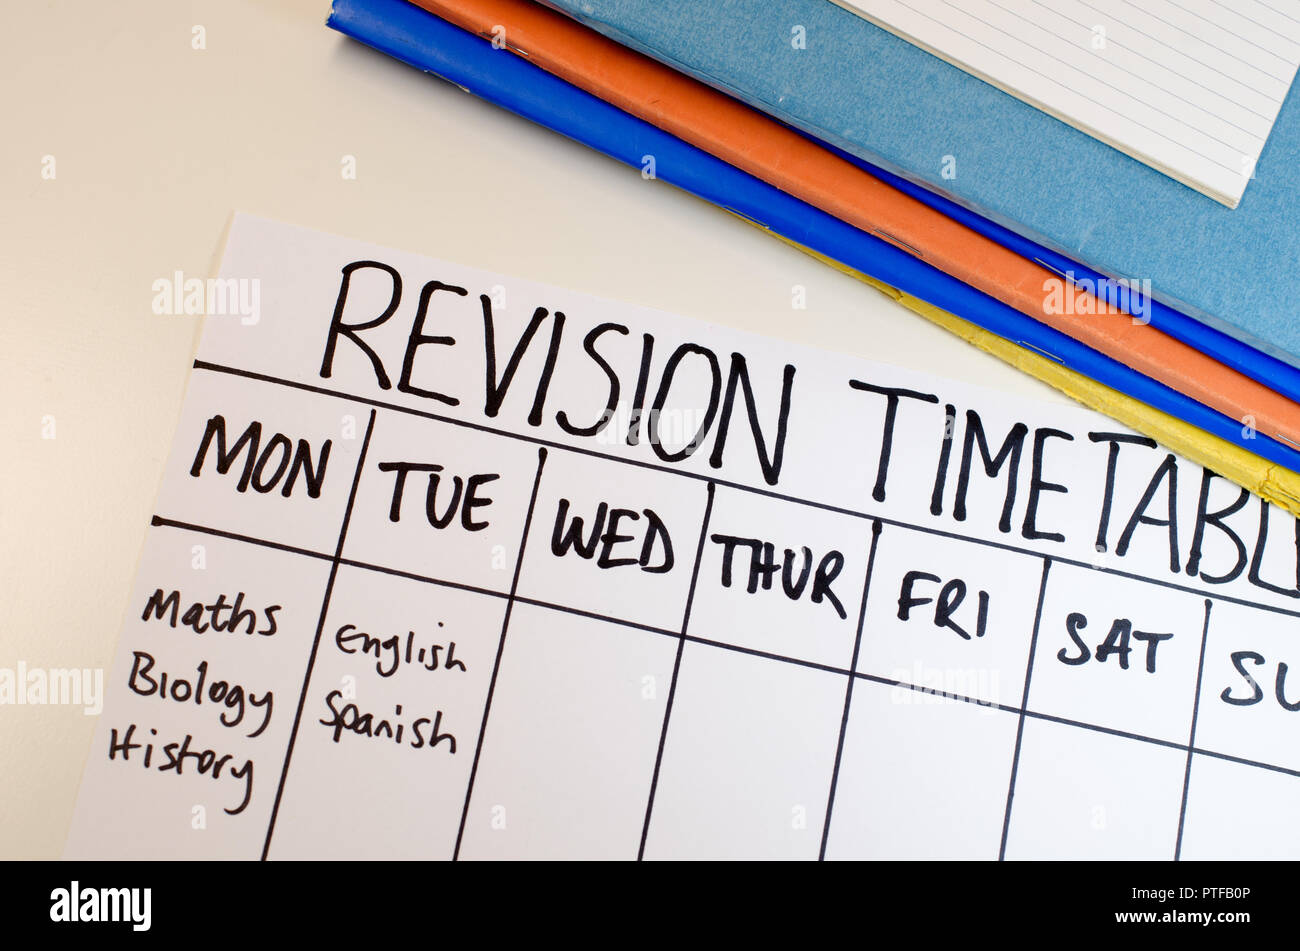 Revision or study timetable concept Stock Photo